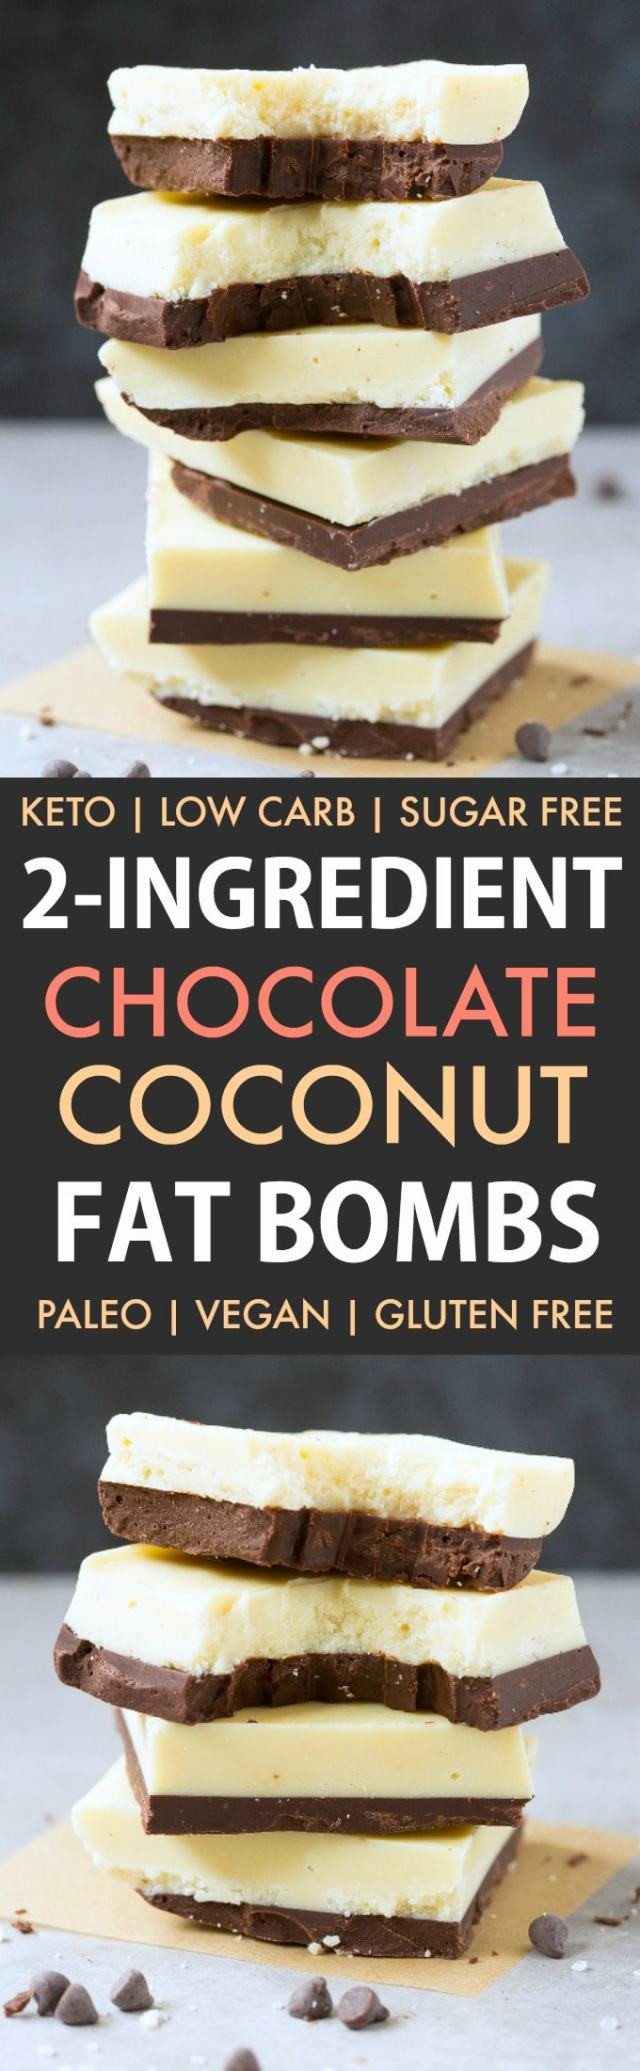 Low Carb Keto Fat Bombs
 Low Carb Keto Chocolate Coconut Fat Bombs Paleo Vegan